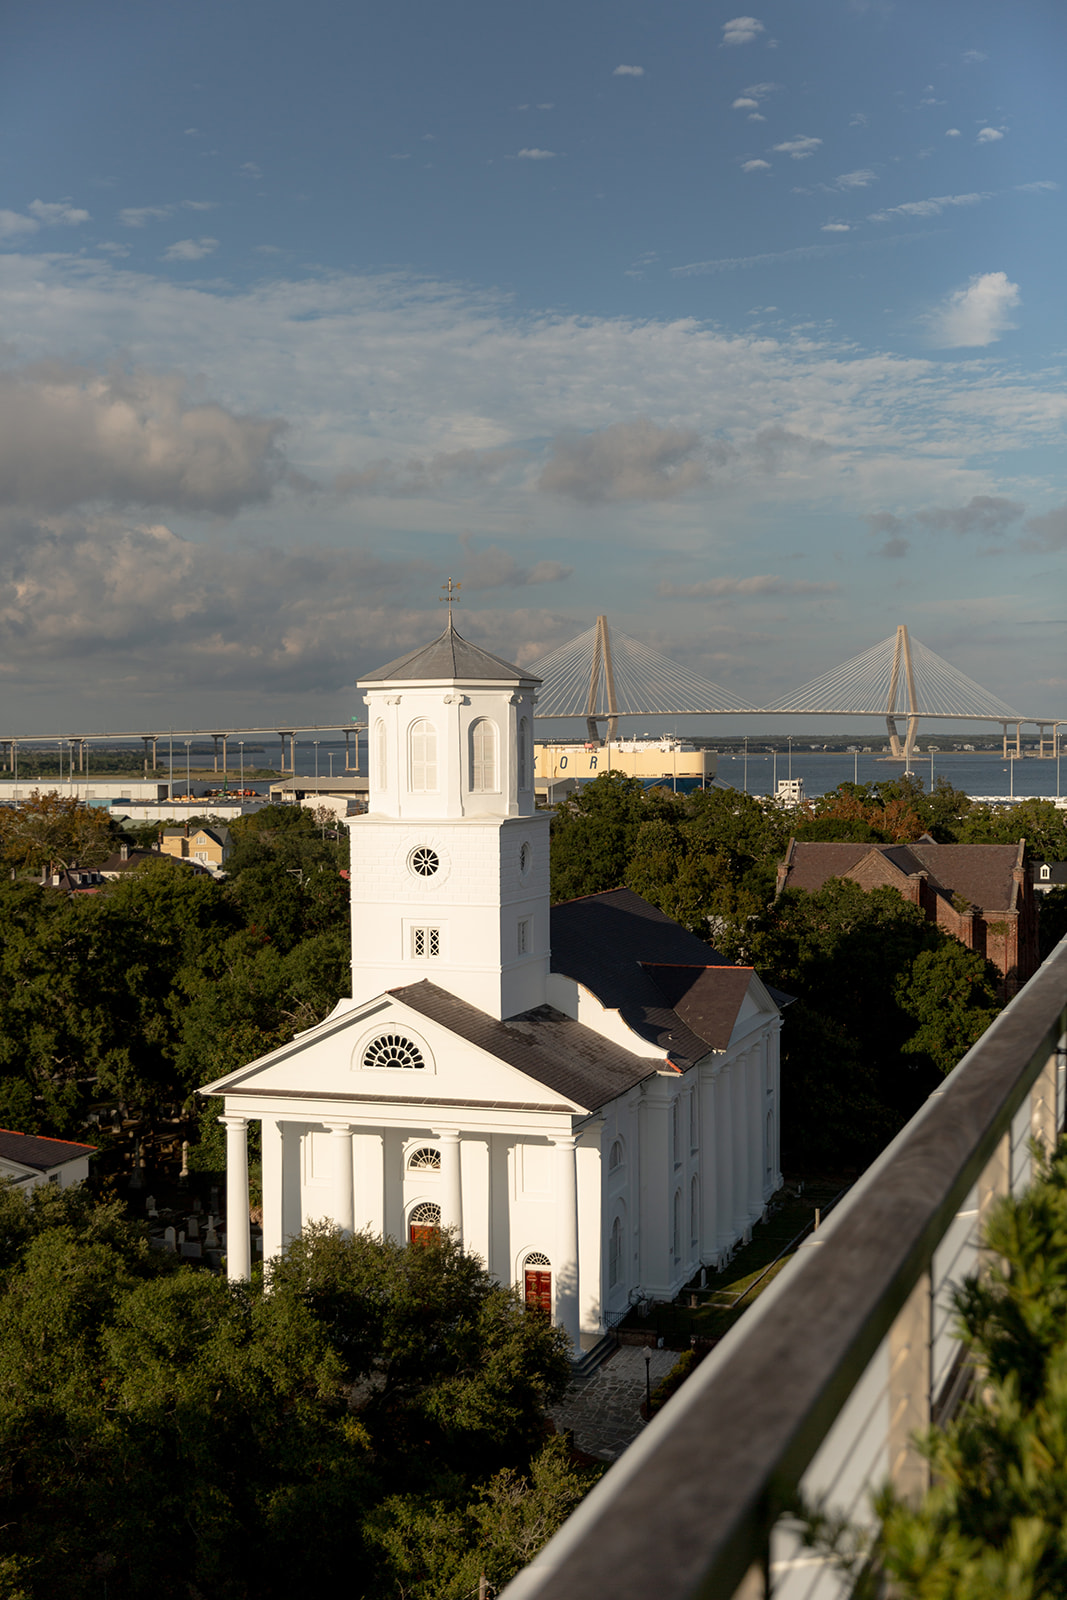 View on Ravenel bride from Dewberry hotel